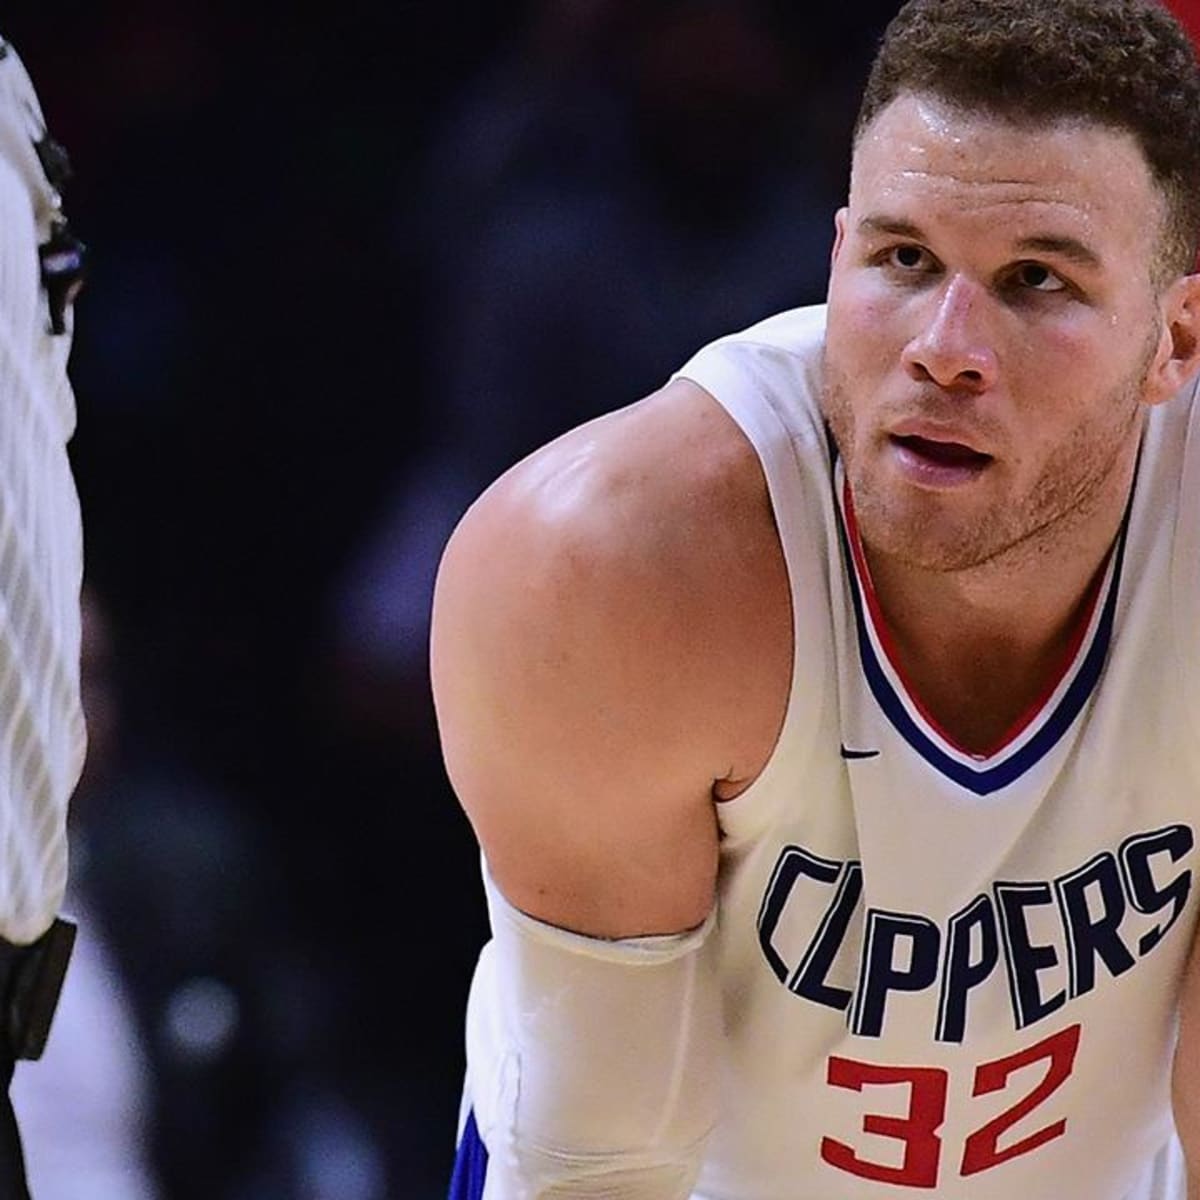 Blake Griffin trade: Breaking down deal from view of Clippers, Pistons